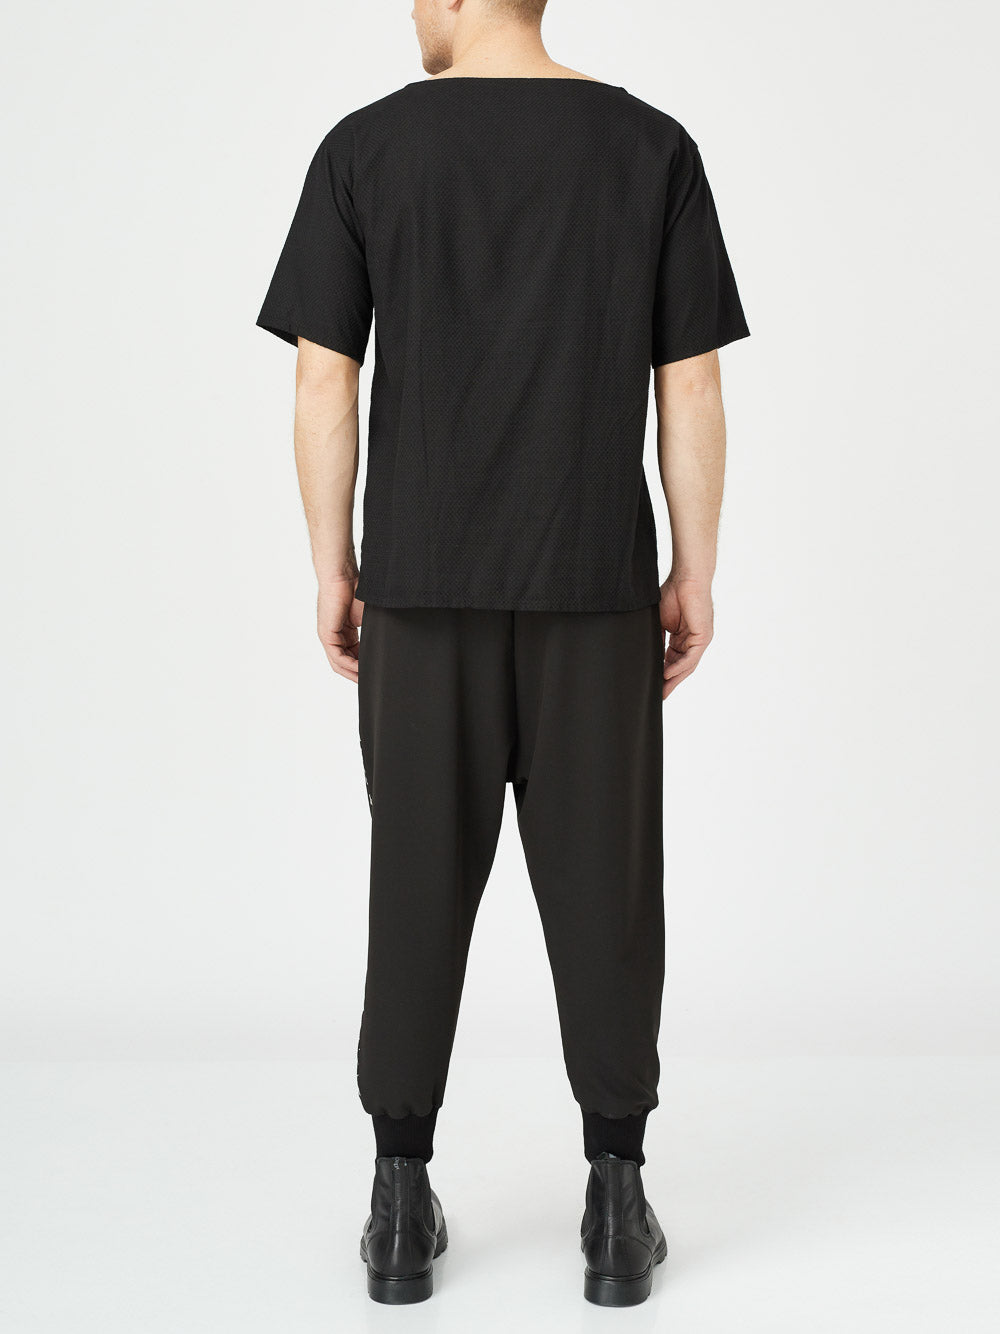 Androgynus Stitched Trousers